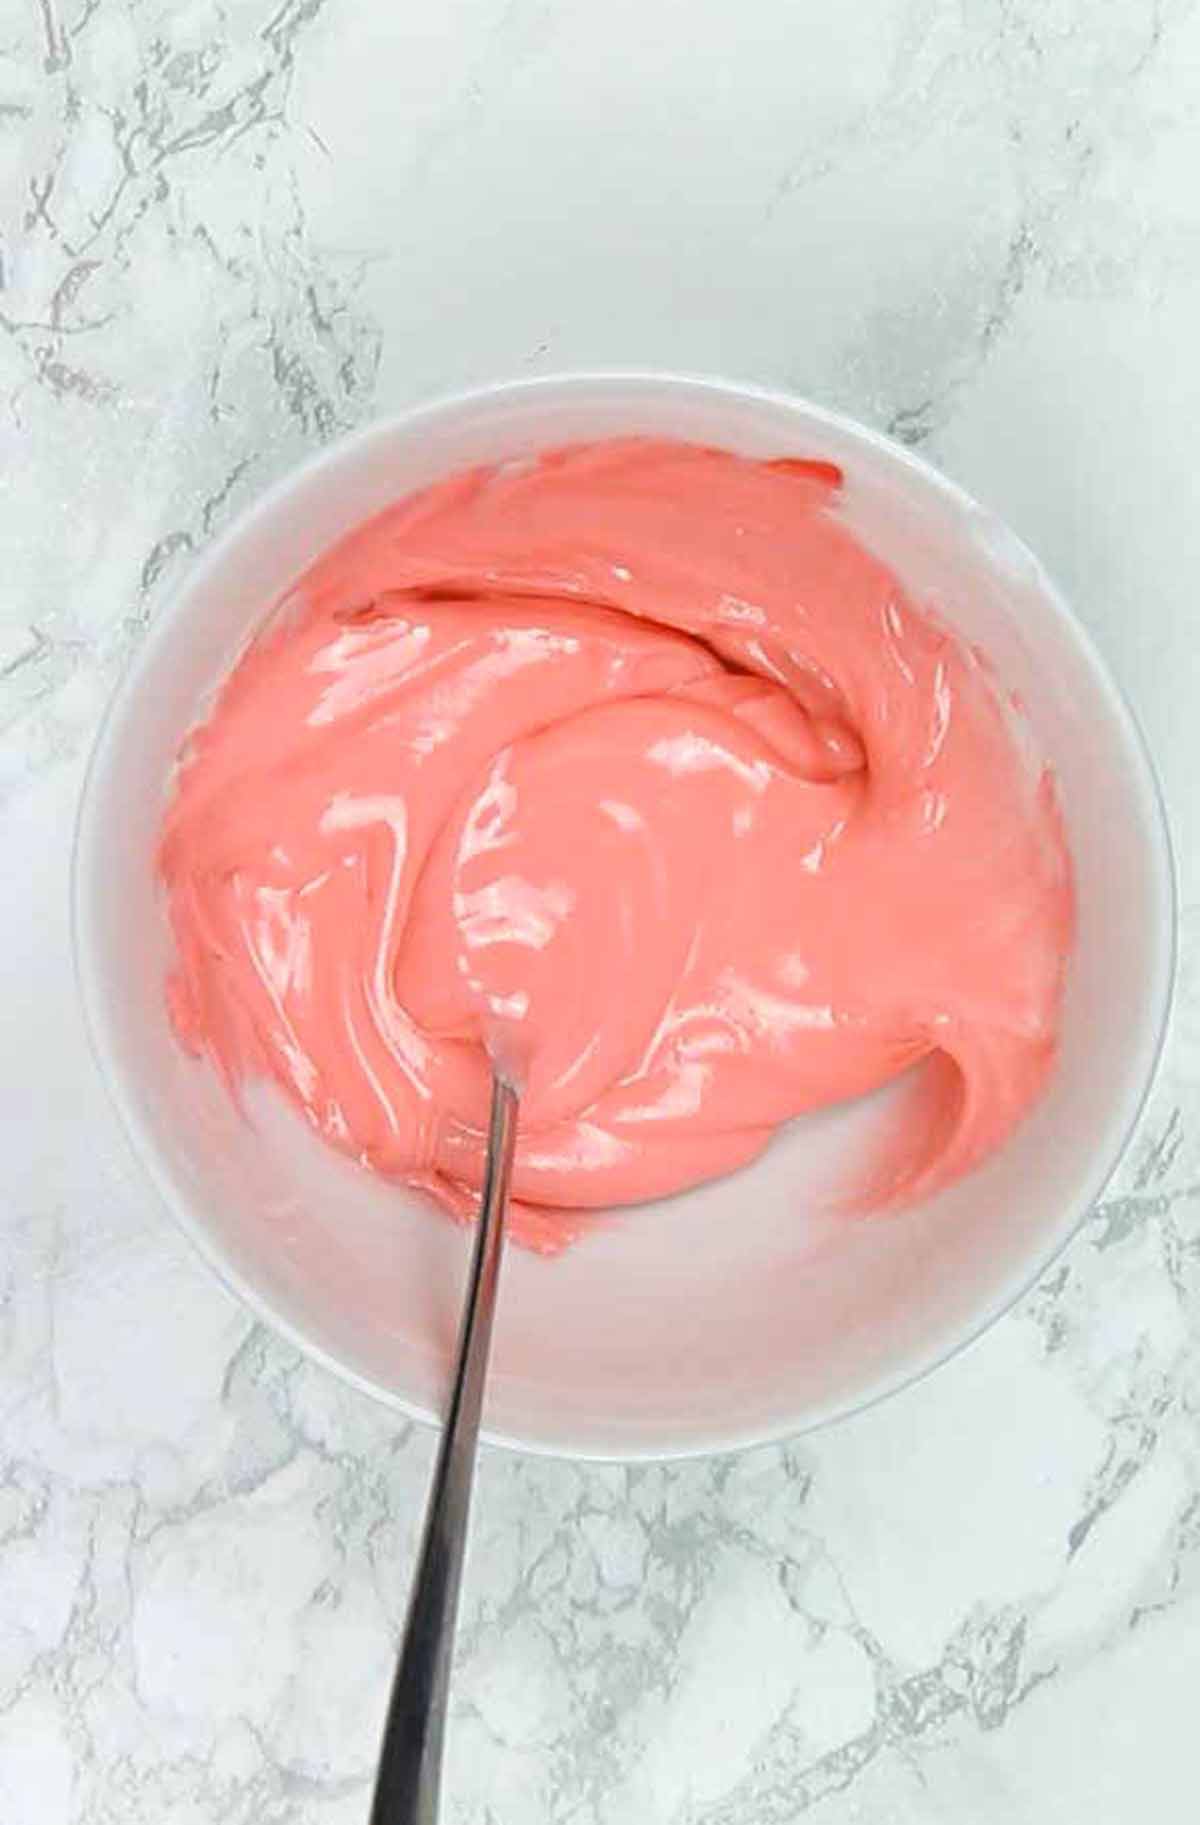 Coloured Icing In A Bowl